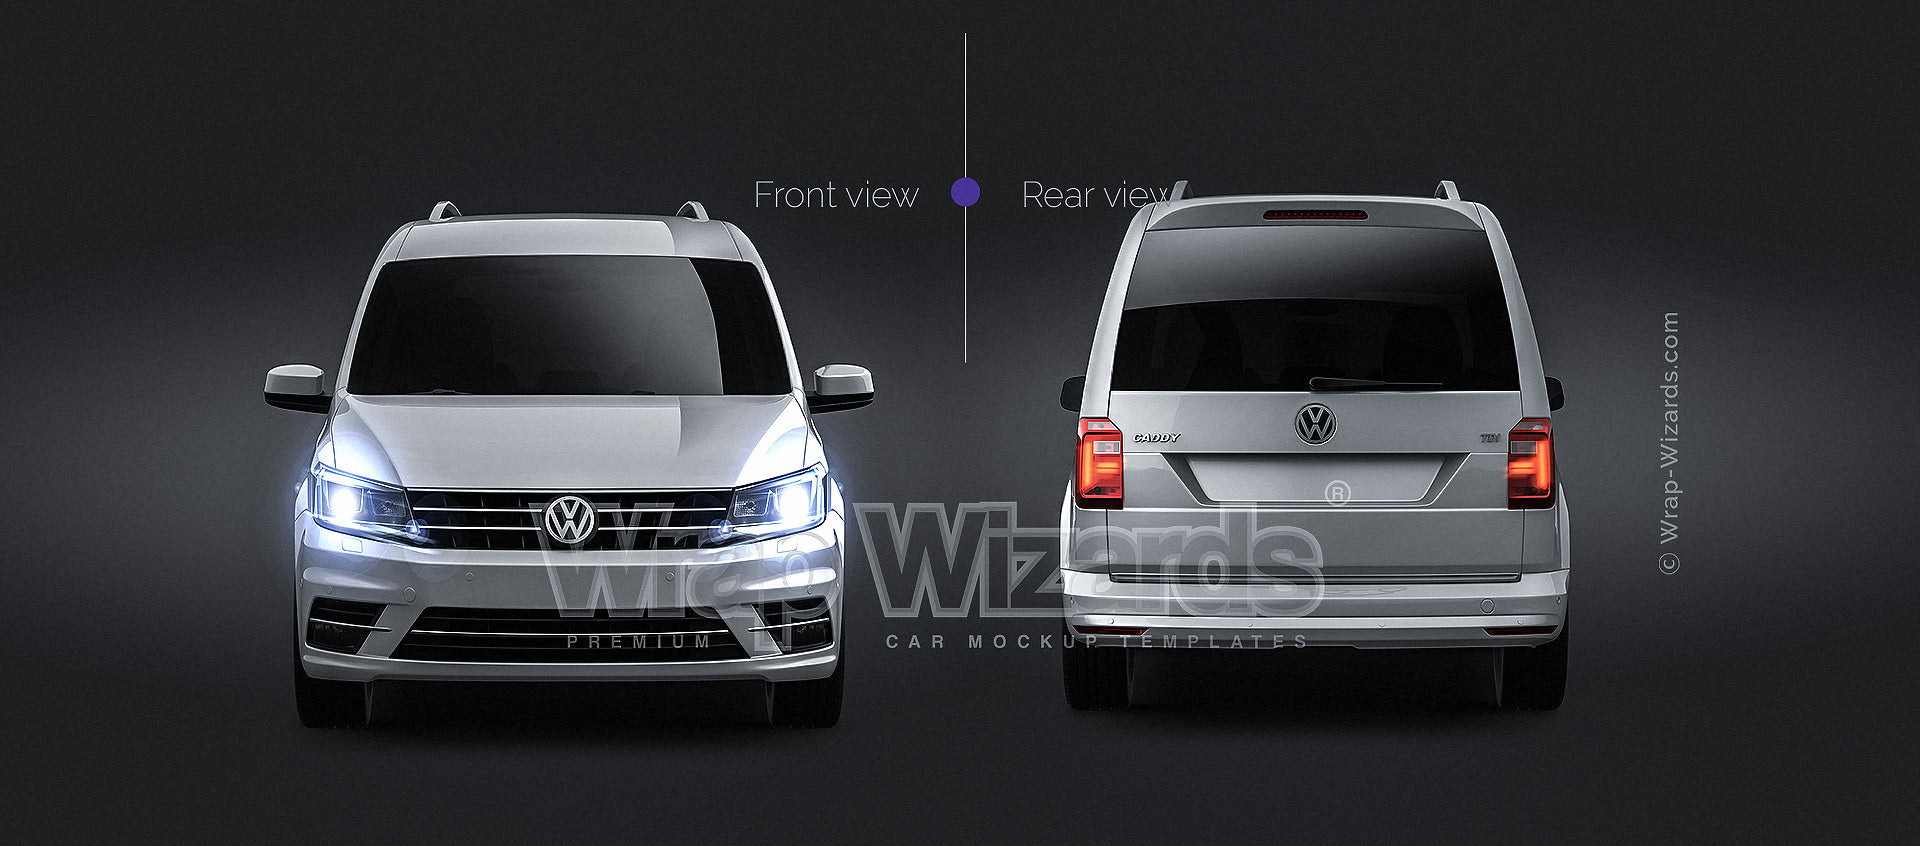 Volkswagen Caddy Passenger 2016 glossy finish - all sides Car Mockup Template.psd